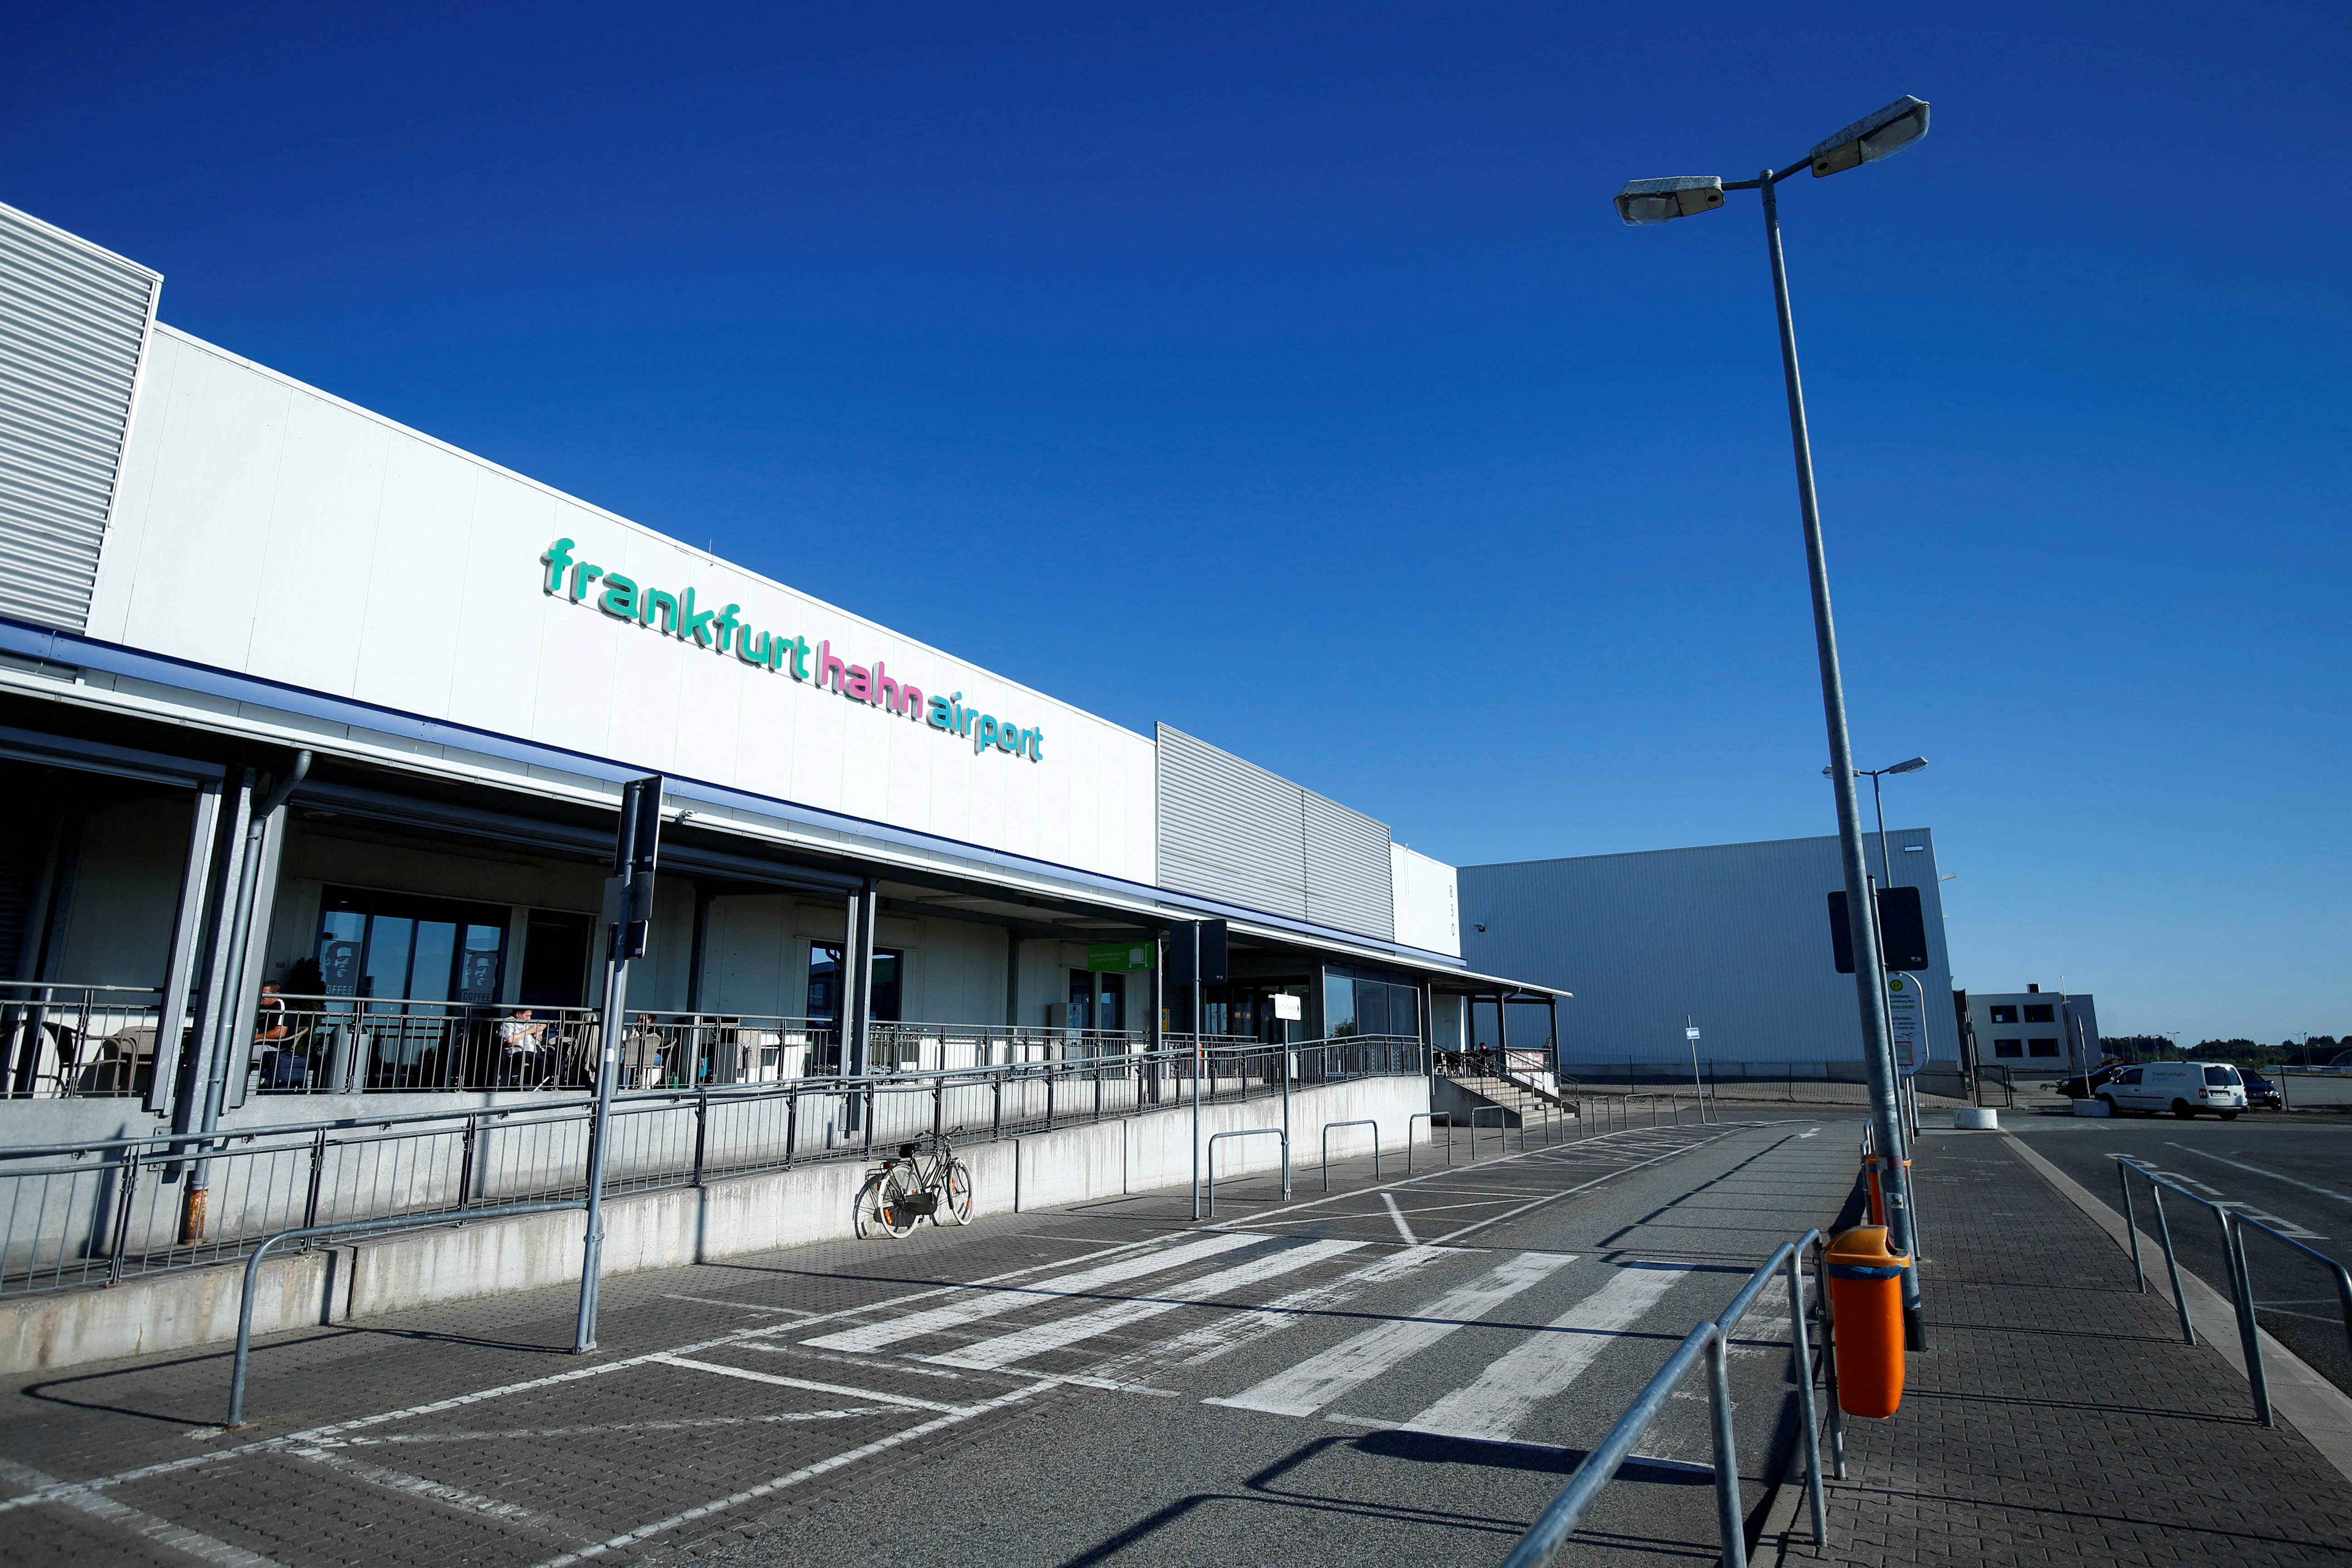 The terminal of Frankfurt-Hahn Airport is pictured in Hahn